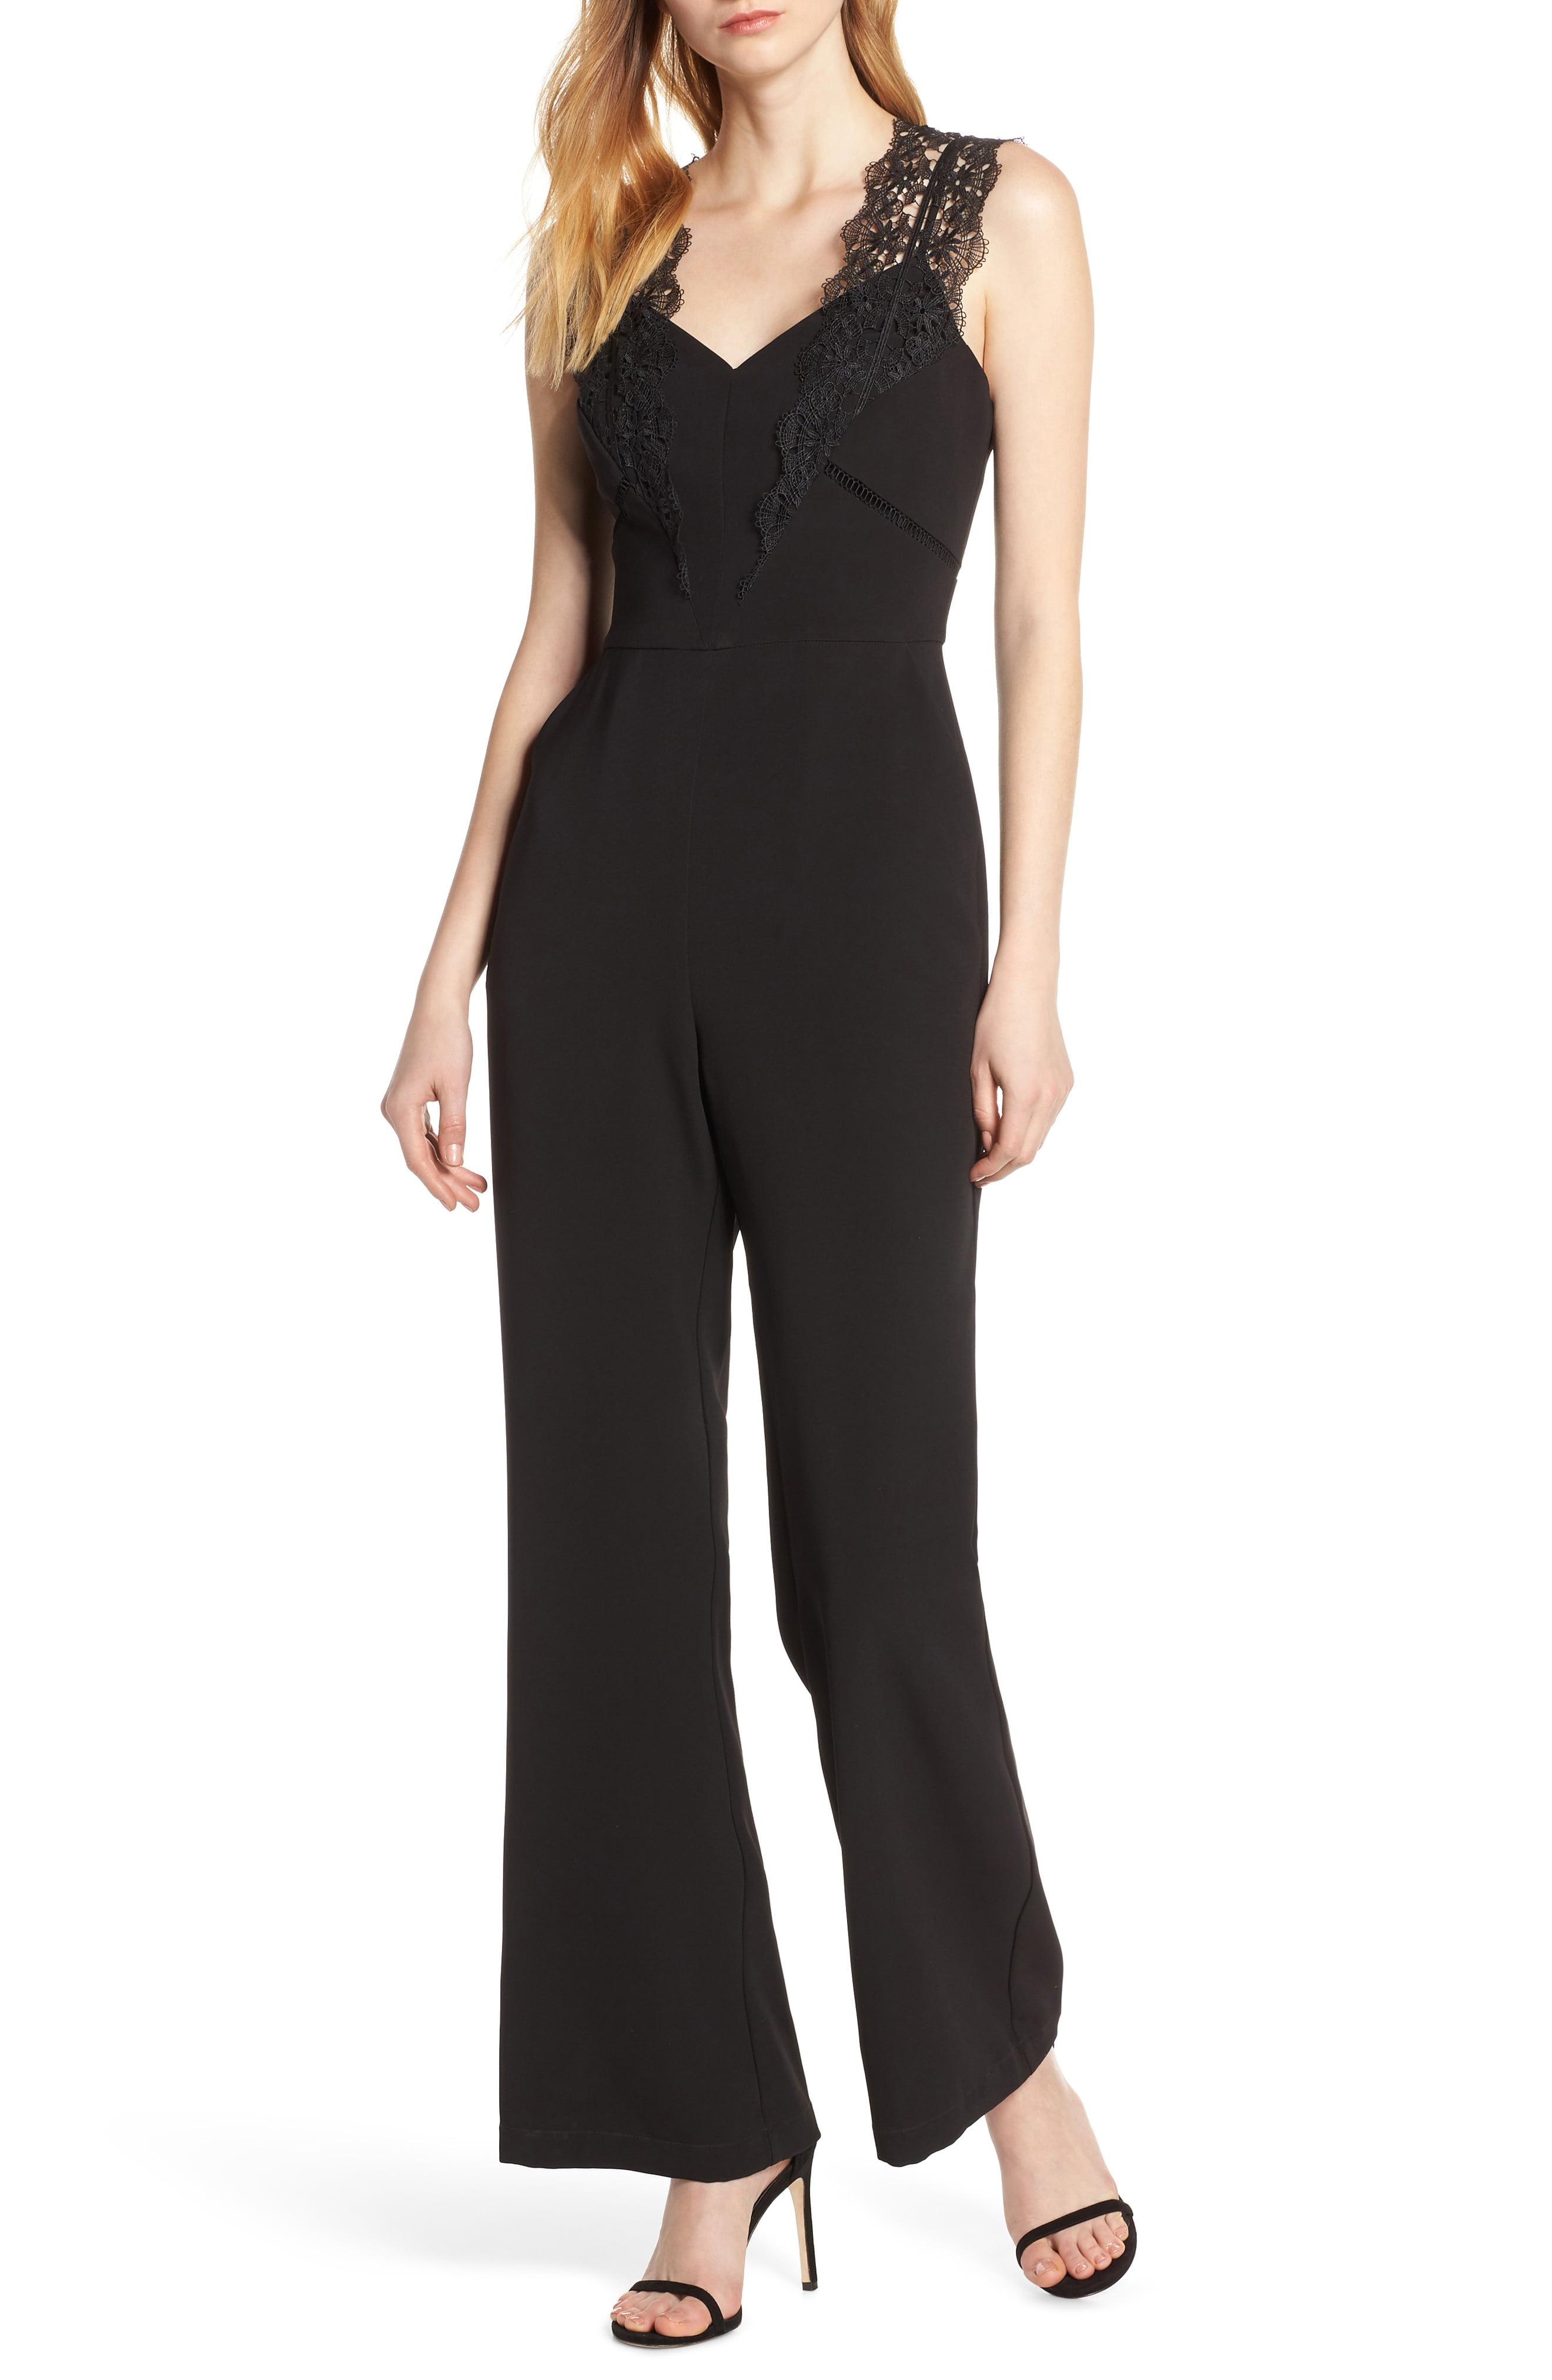 Lyst - Harlyn Lace Flare-leg Jumpsuit in Black